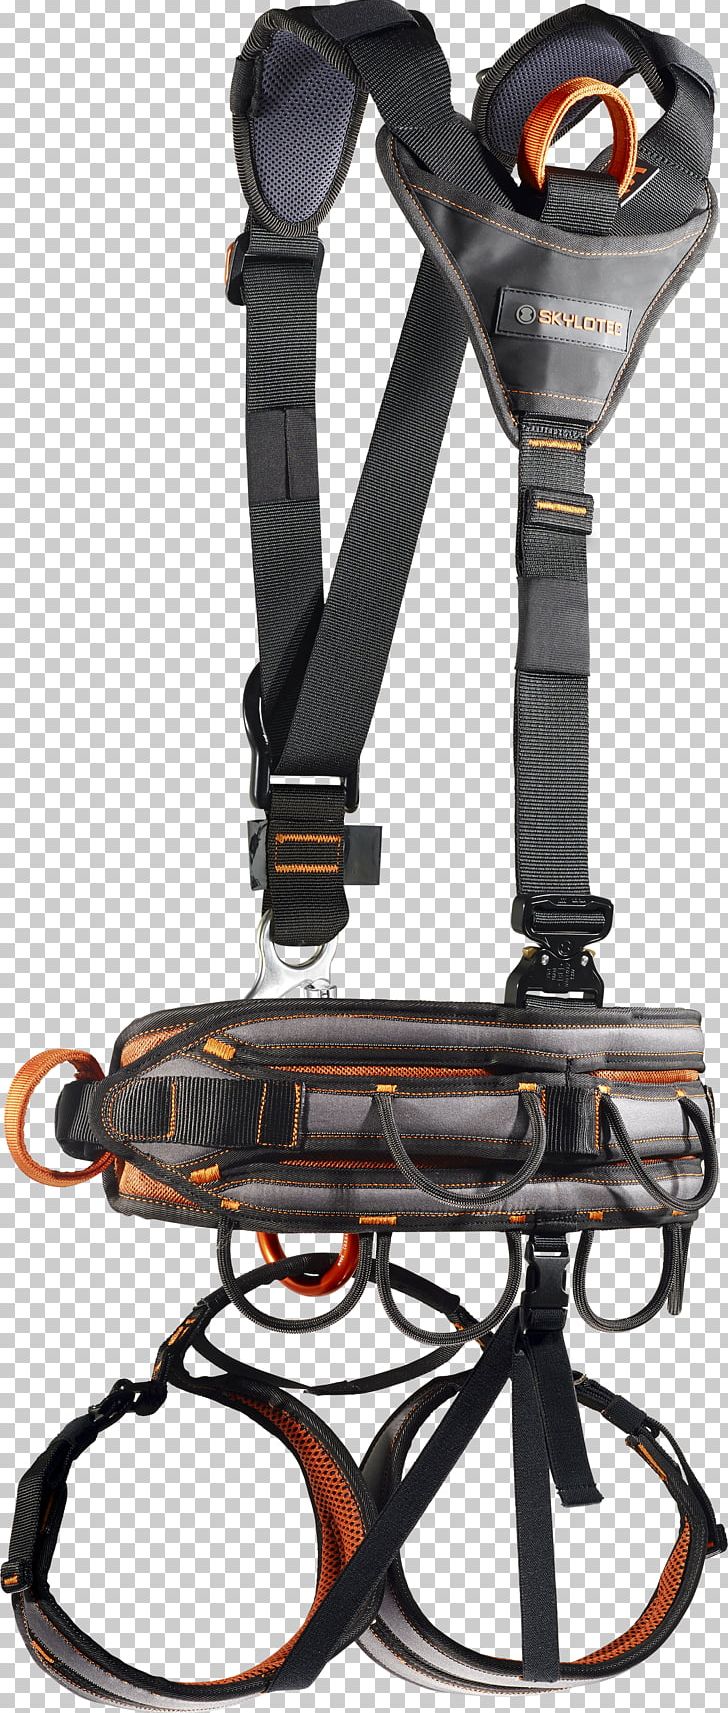 Climbing Harnesses SKYLOTEC Personal Protective Equipment Ignite Proton PNG, Clipart, Belt, Climbing, Climbing Harness, Climbing Harnesses, Enstandard Free PNG Download